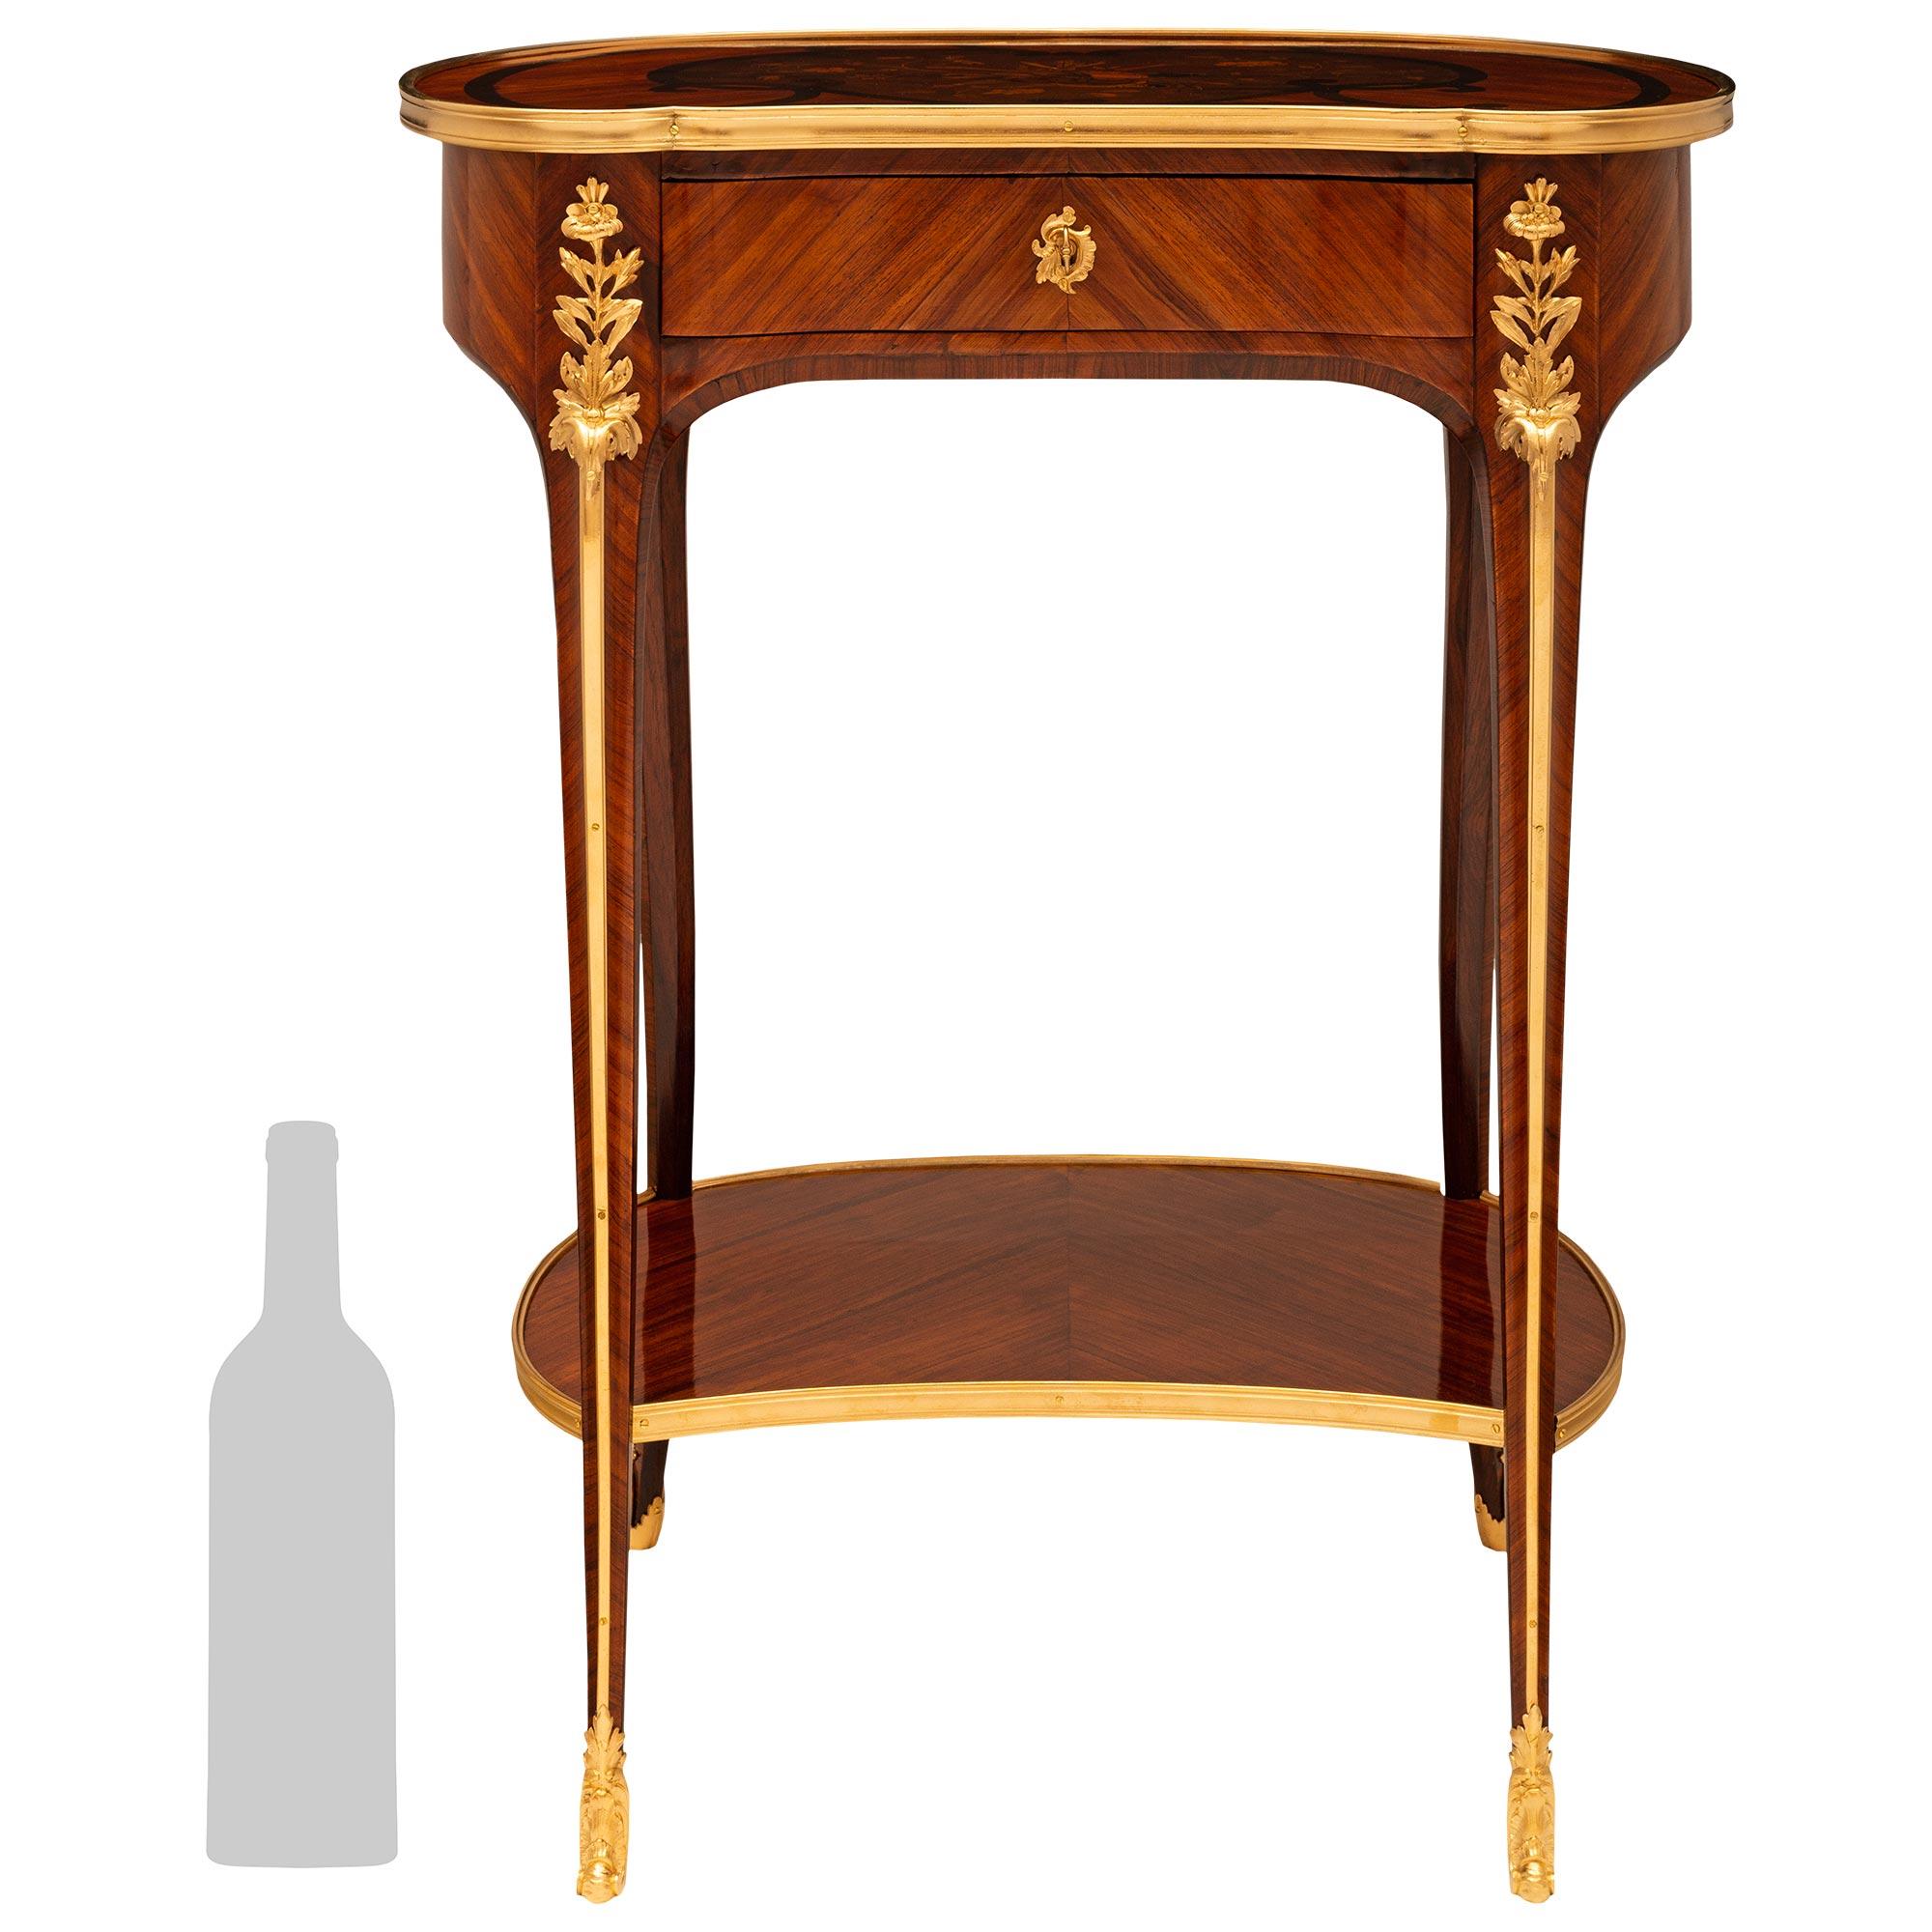 A beautiful and high quality French 19th century Louis XV st. Kingwood, Tulipwood, and Ormolu side table. This wonderful kidney shaped freestanding side table is raised on four finely tapered square cabriole legs with foliate decorated sabots. The